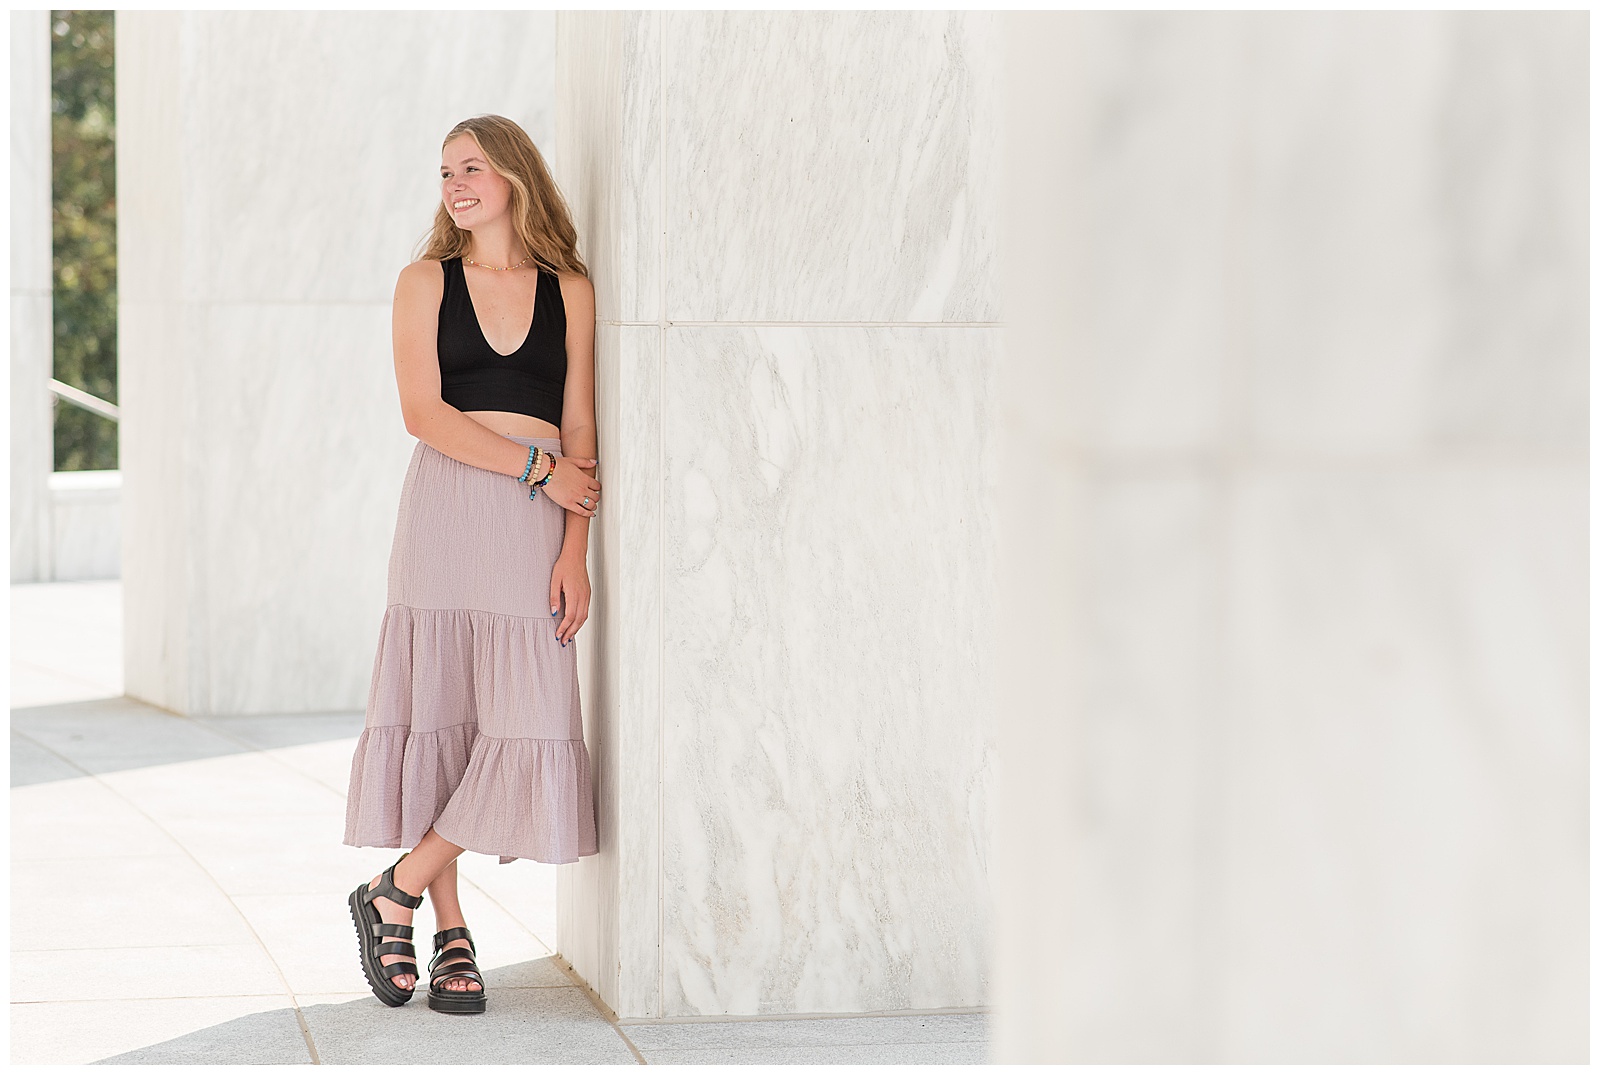 senior girl in black tank top and long skirt leaning left shoulder against wall as she looks right and smiles at founders hall